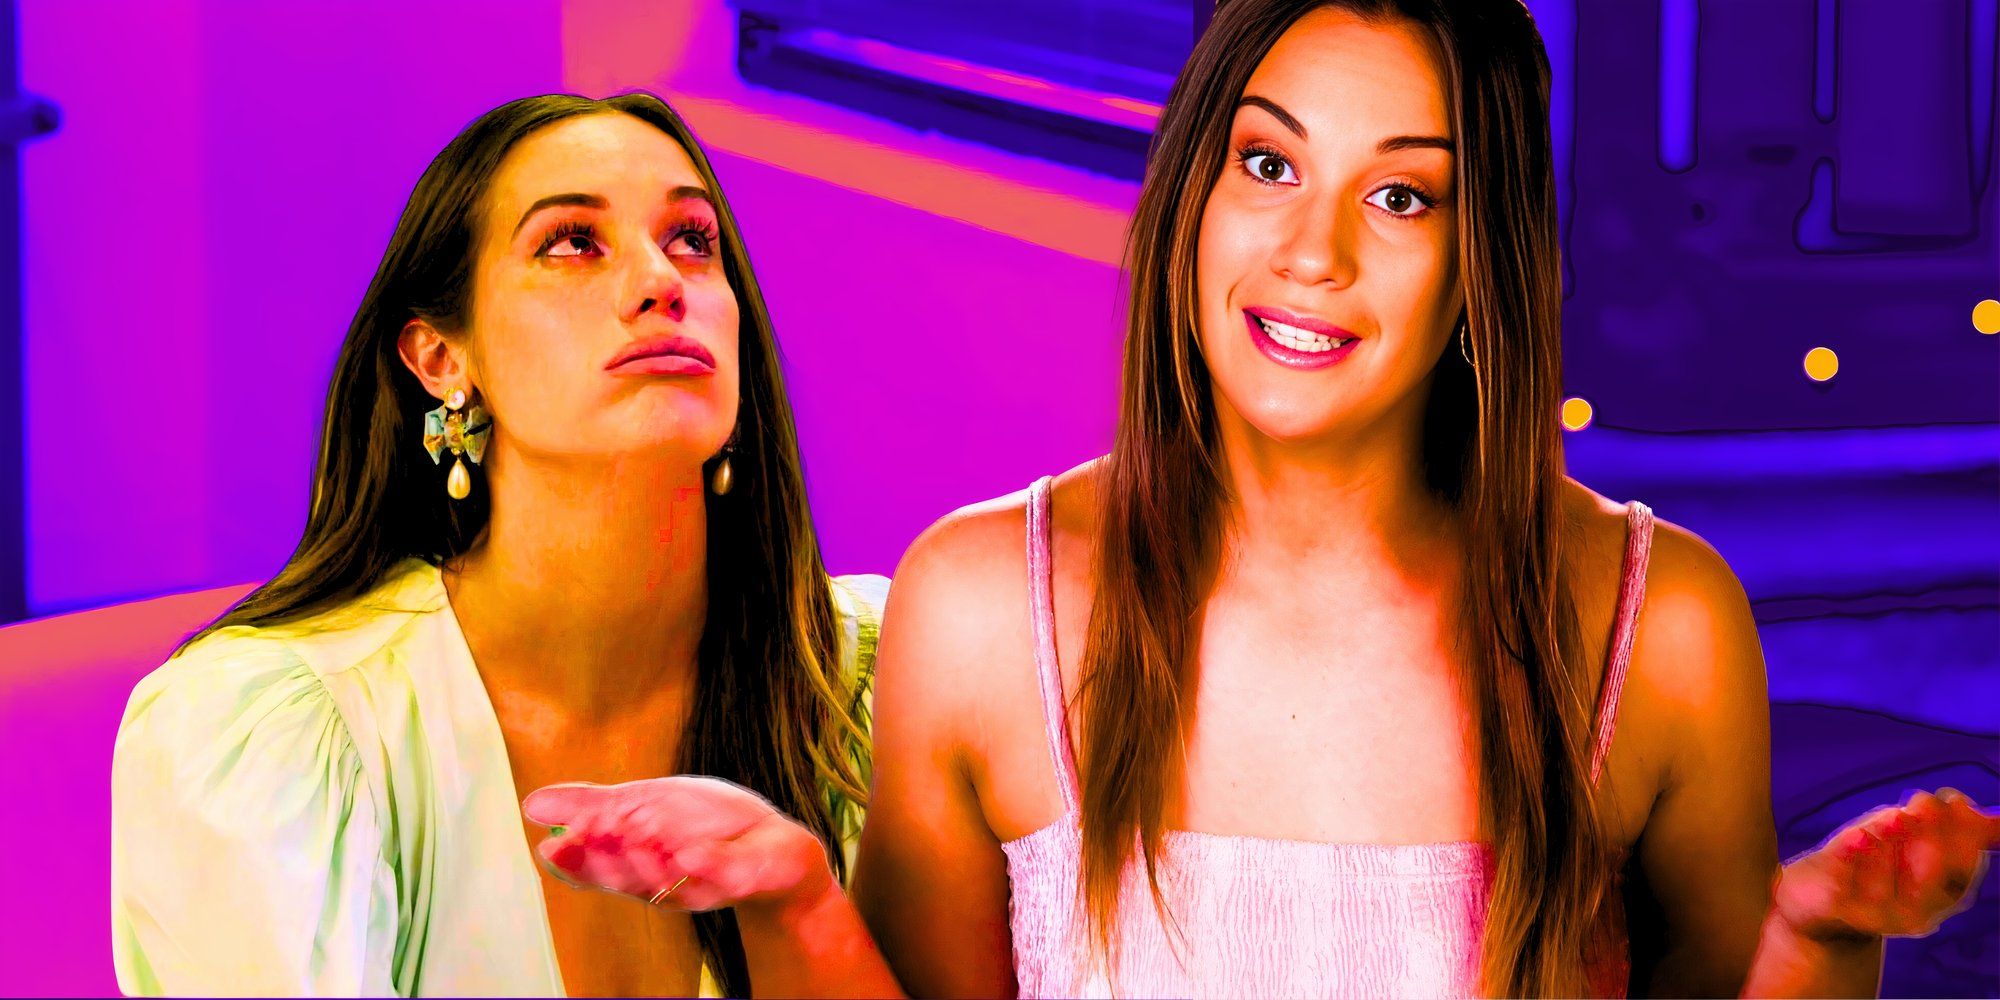 summe house star hannah berner in a montage featuring two poses one happy and one unhappy with pink and purple background